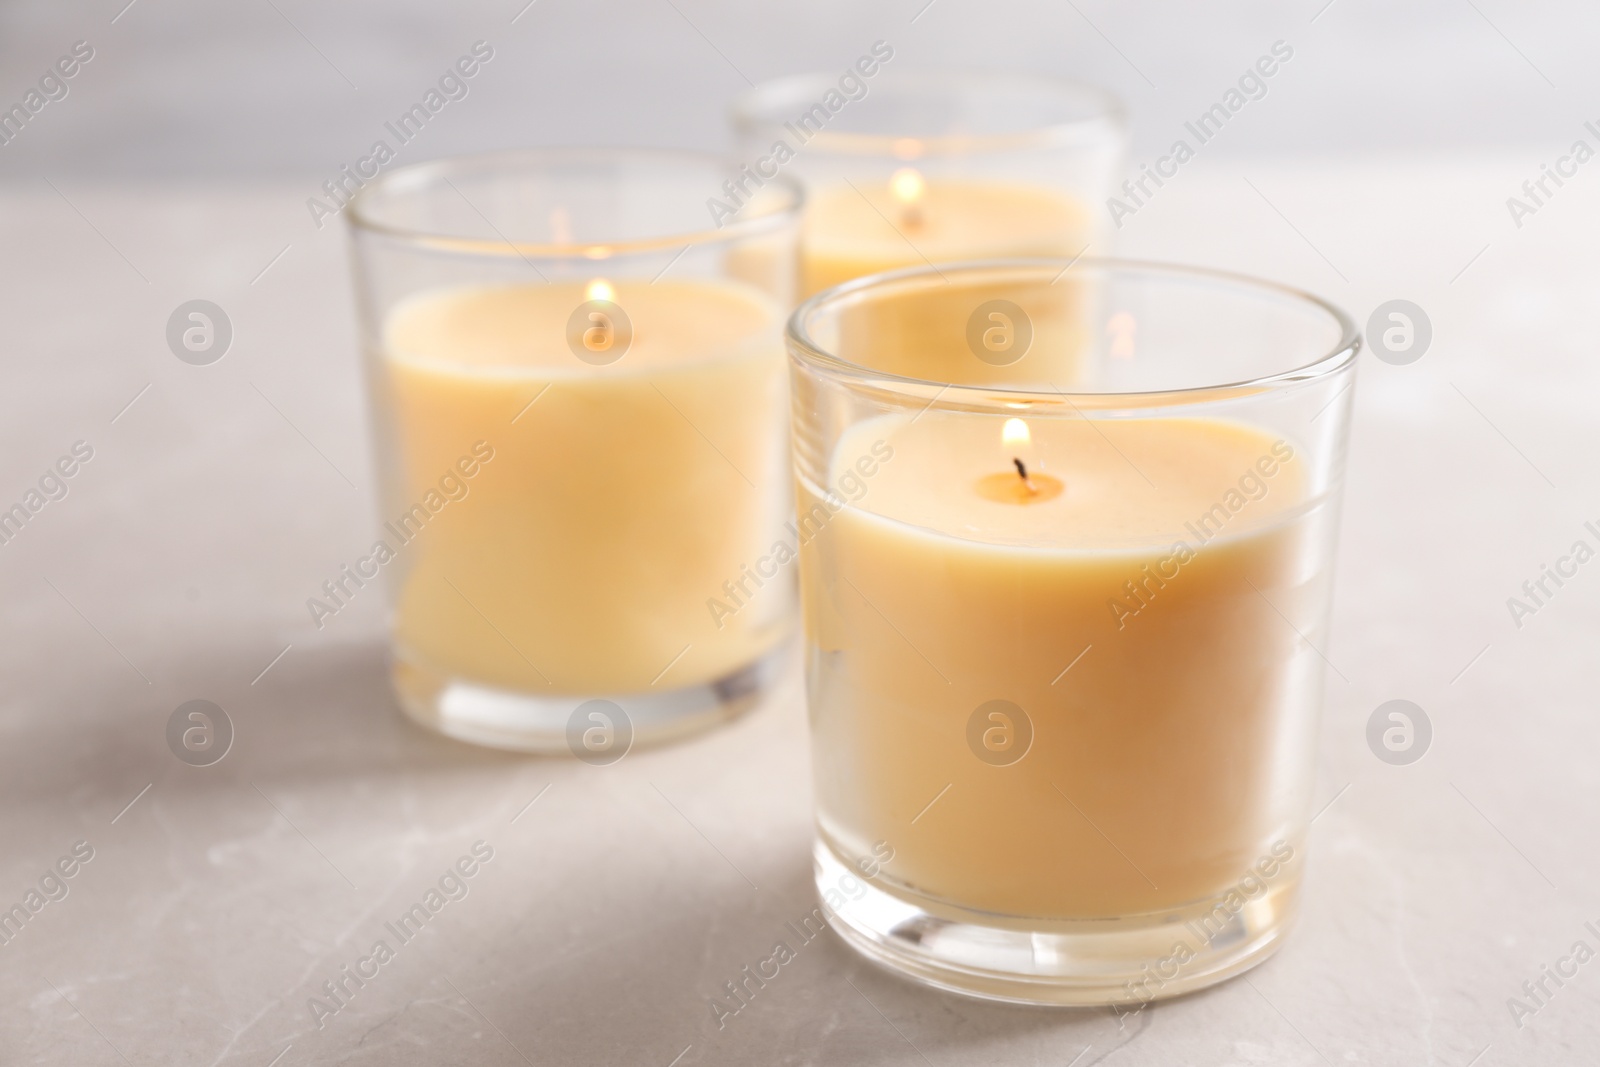 Photo of Three burning candles in glasses on table